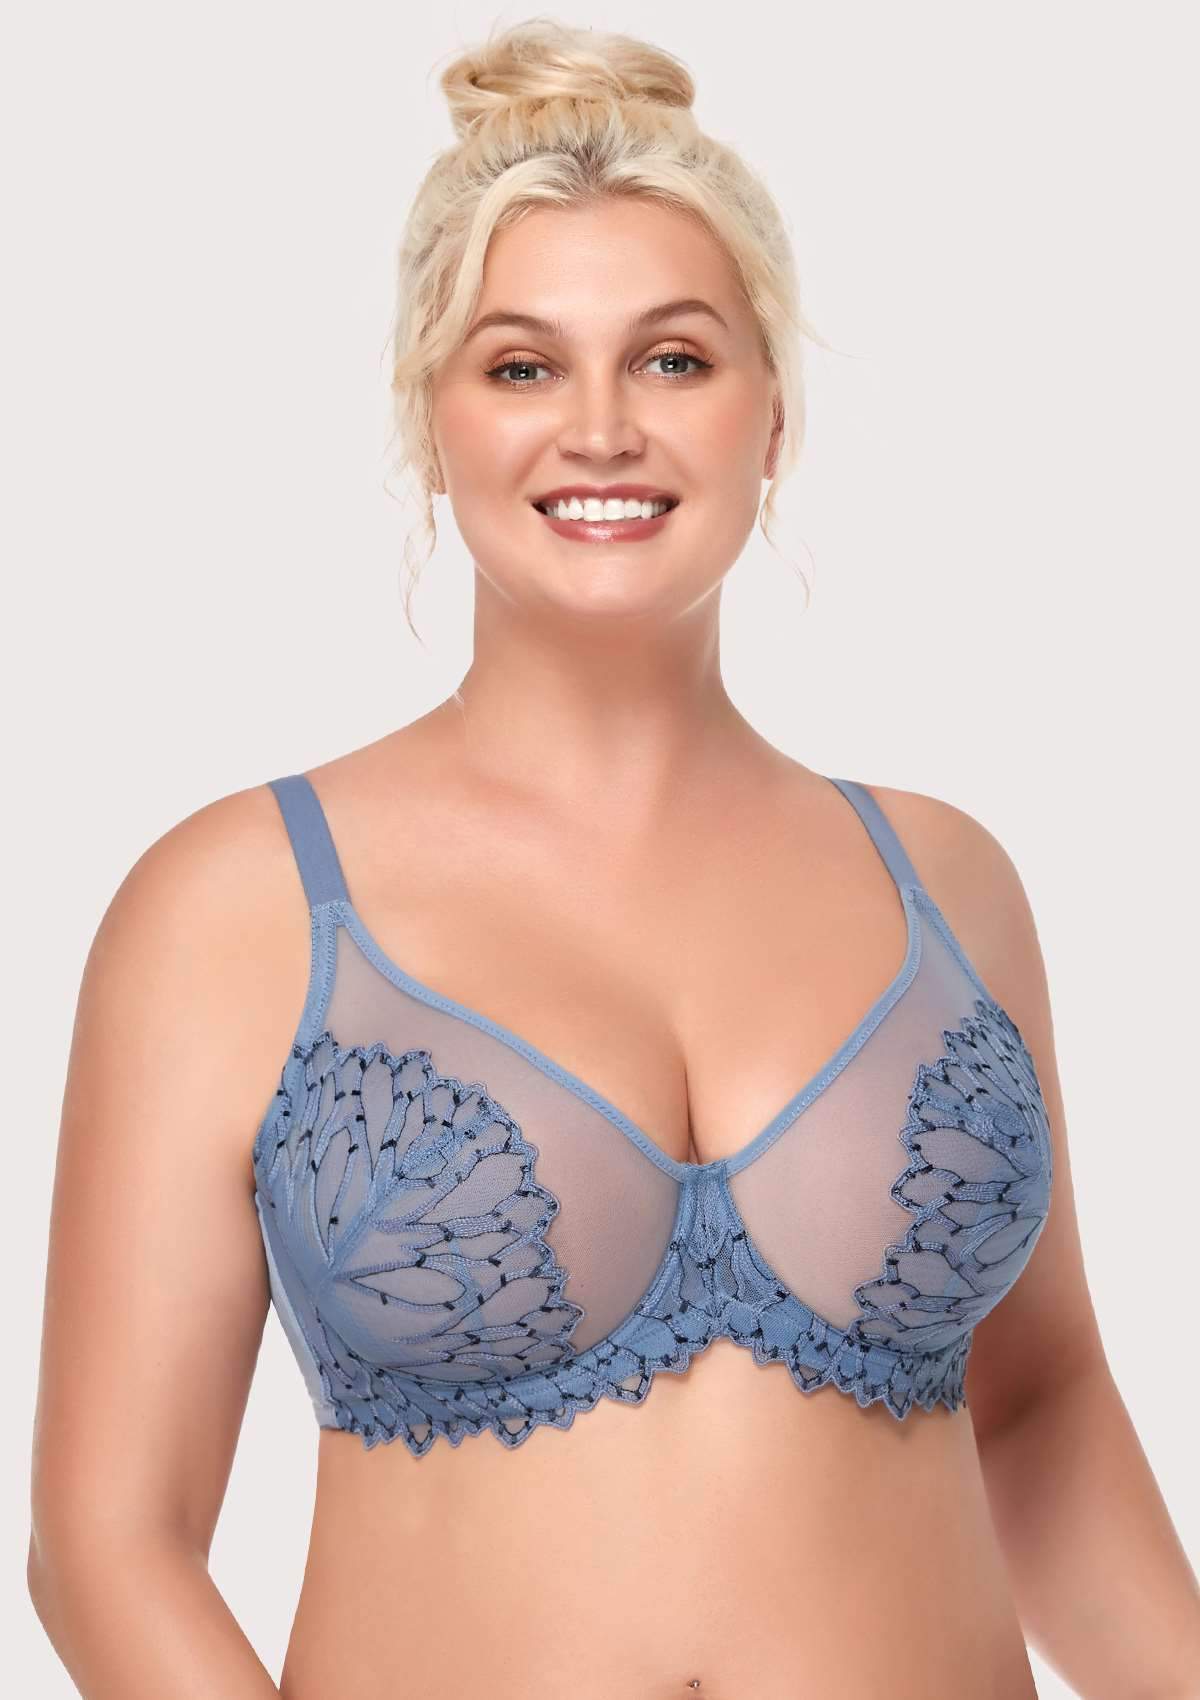 HSIA Chrysanthemum Plus Size Lace Bra: Back Support Bra For Posture - Blue / 32 / C